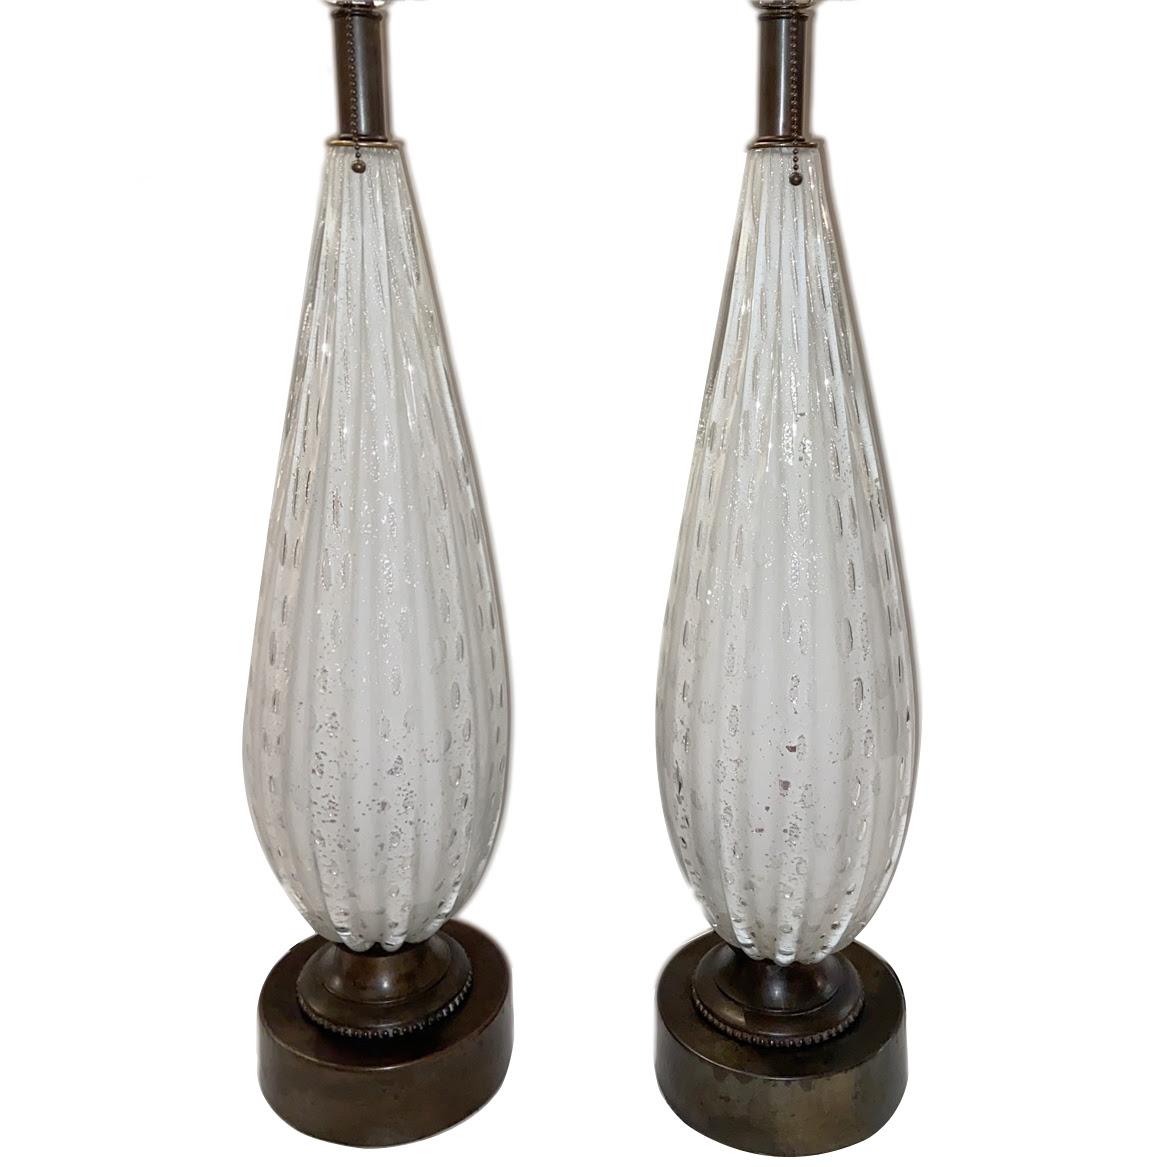 A pair of circa 1950’s Murano glass table lamps

Measurements: Height body: 24″ Height to shade: 36″